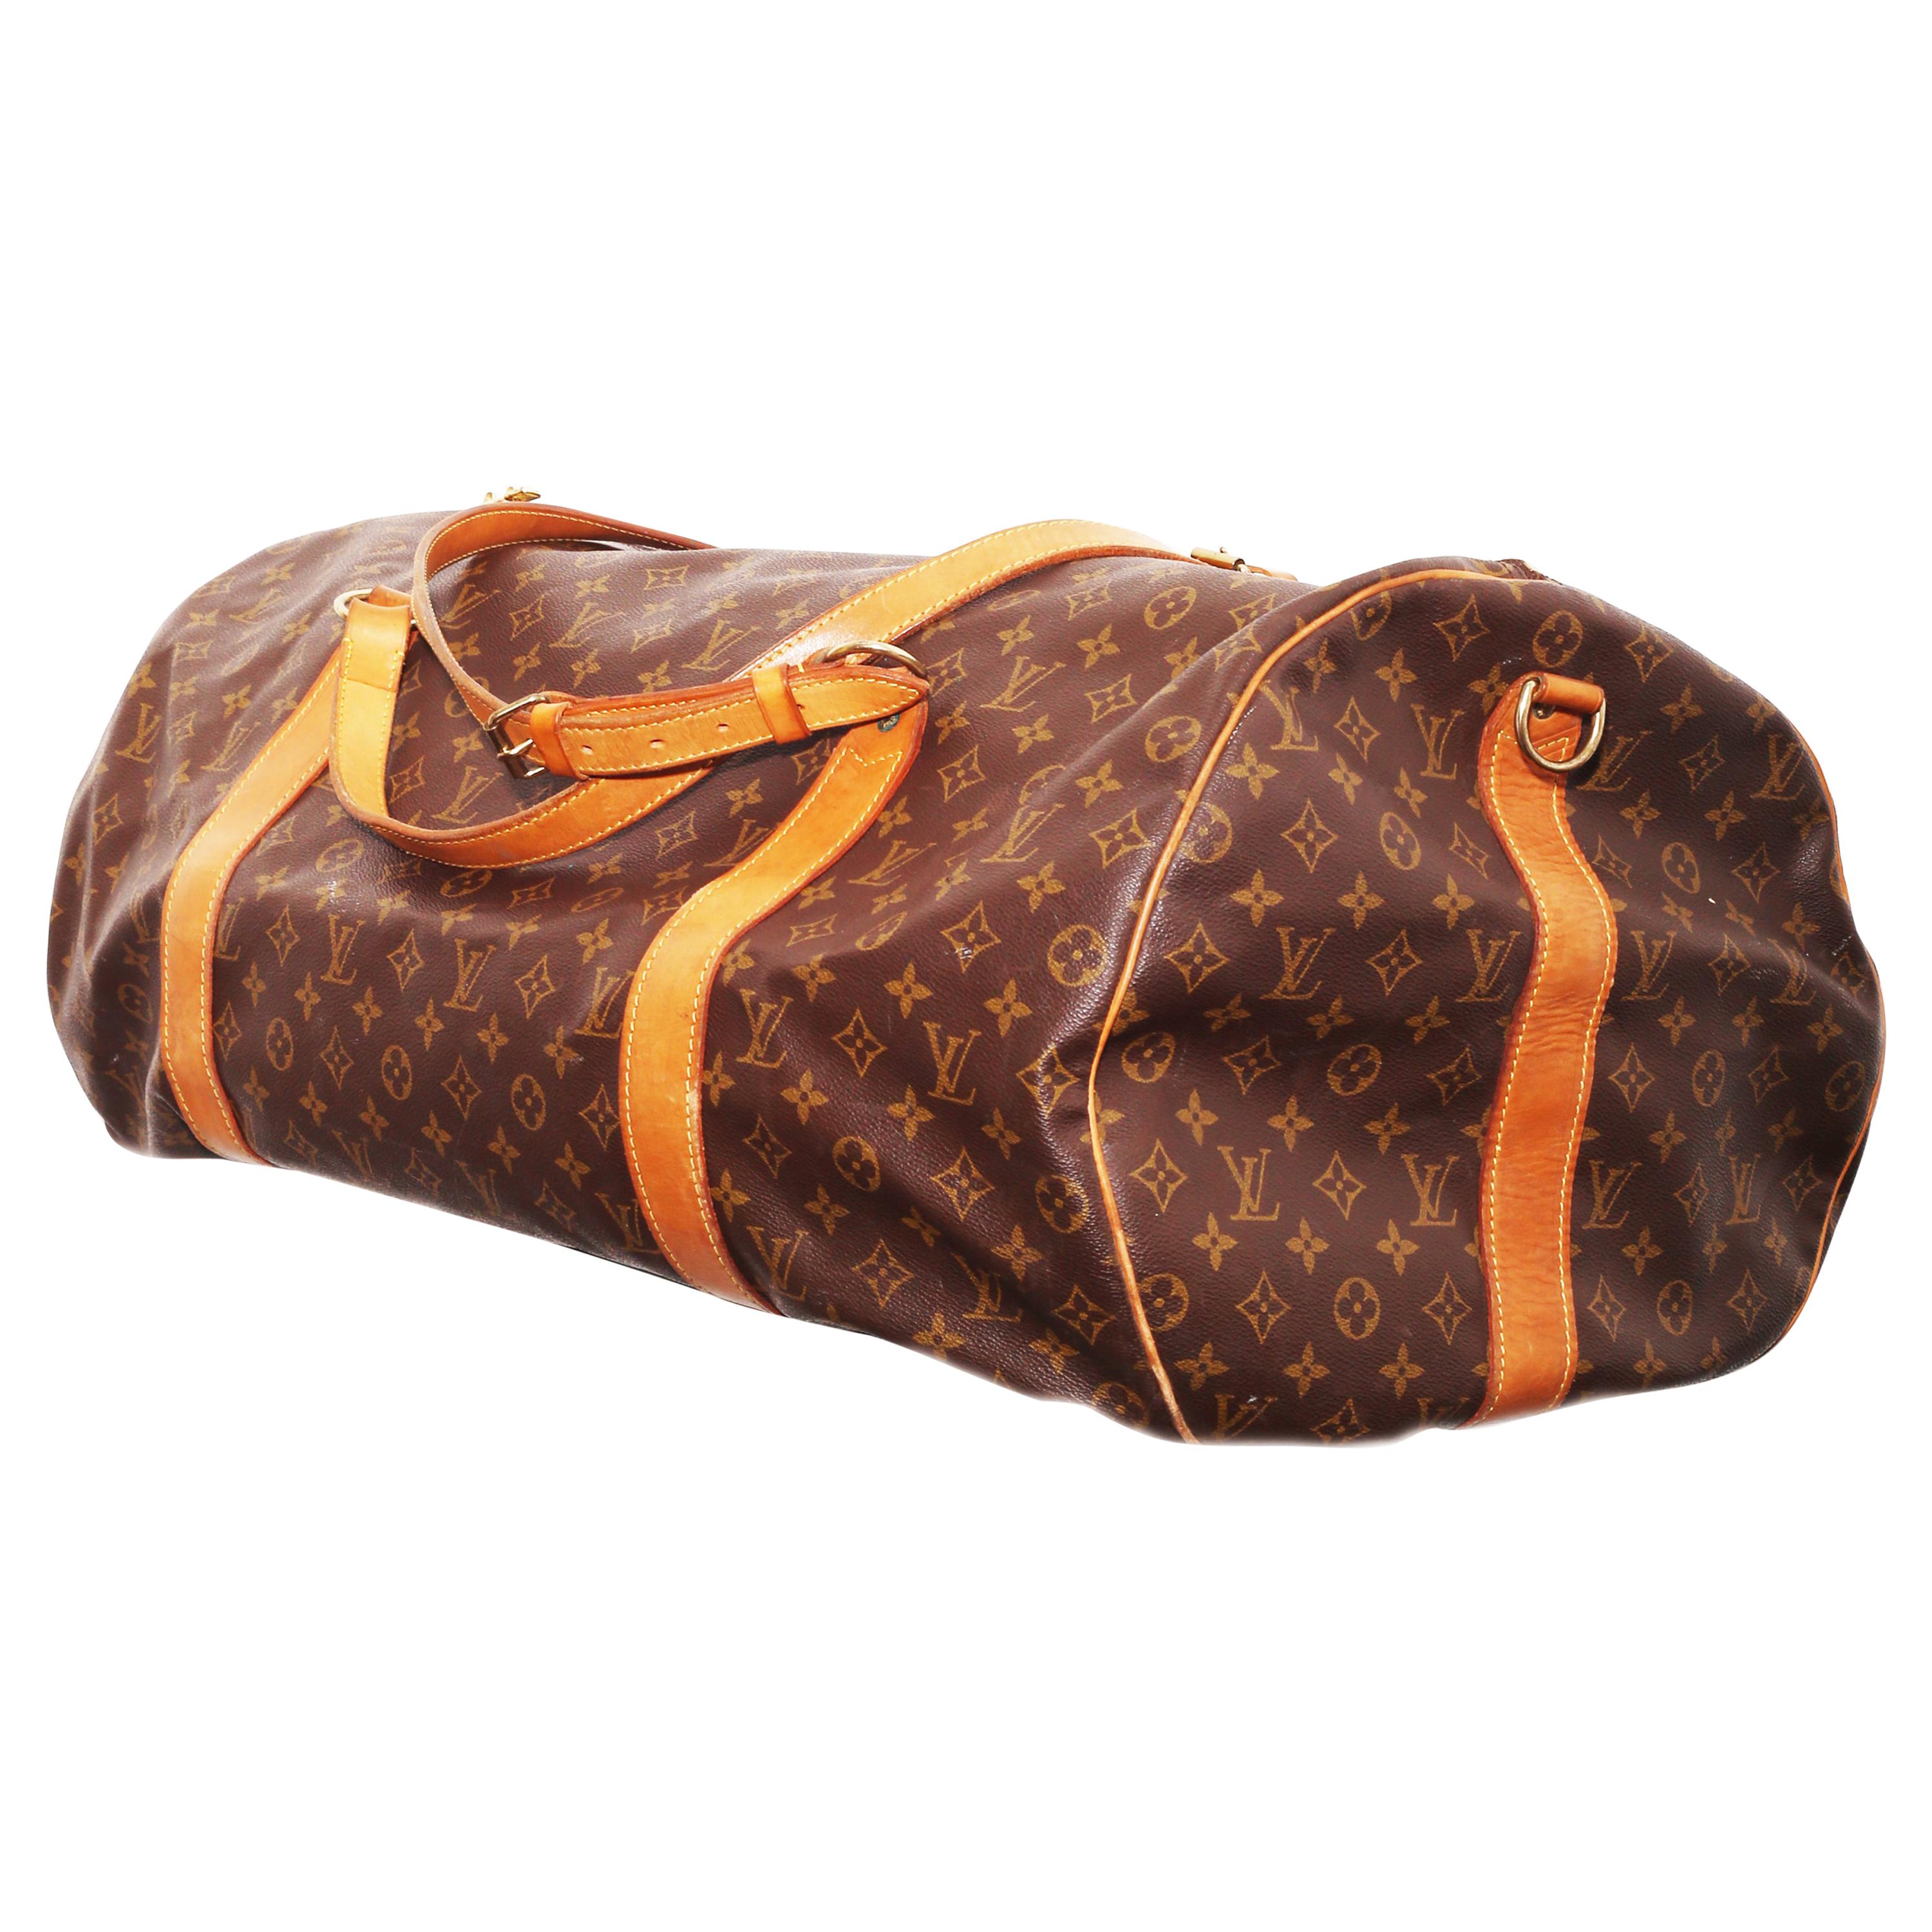 35x65x36
Louis Vuitton Keepall Bandouliere Bag Monogram Canvas 65

Condition
Very good. Moderate darkening, scuffs on handle and leather trims, minor discoloration and wear in interior, scratches and tarnish on hardware.
Accessories: Poignet, Lock,